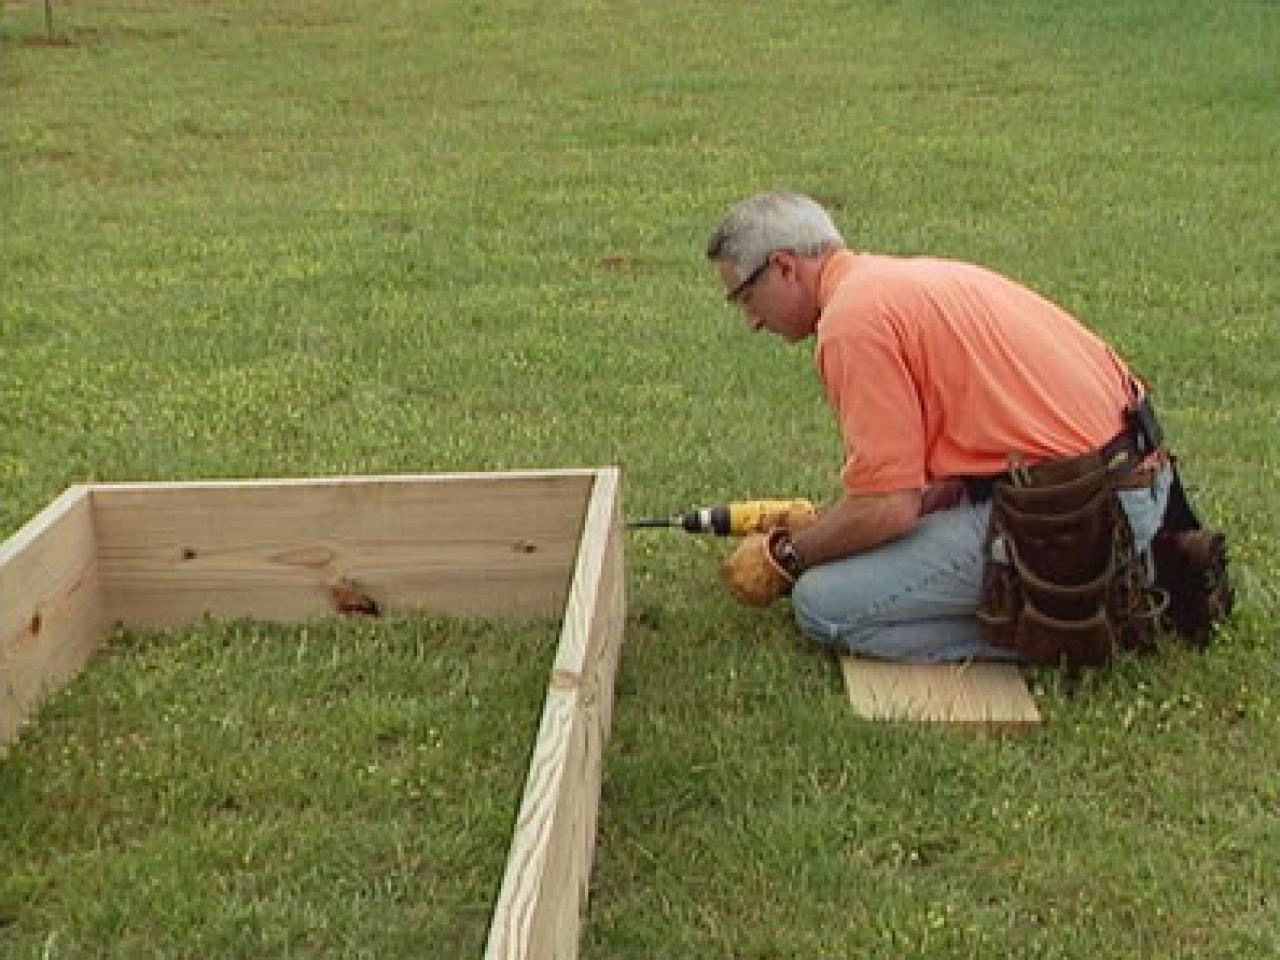 How To Build Raised Garden Beds, How To Build An Elevated Garden Box